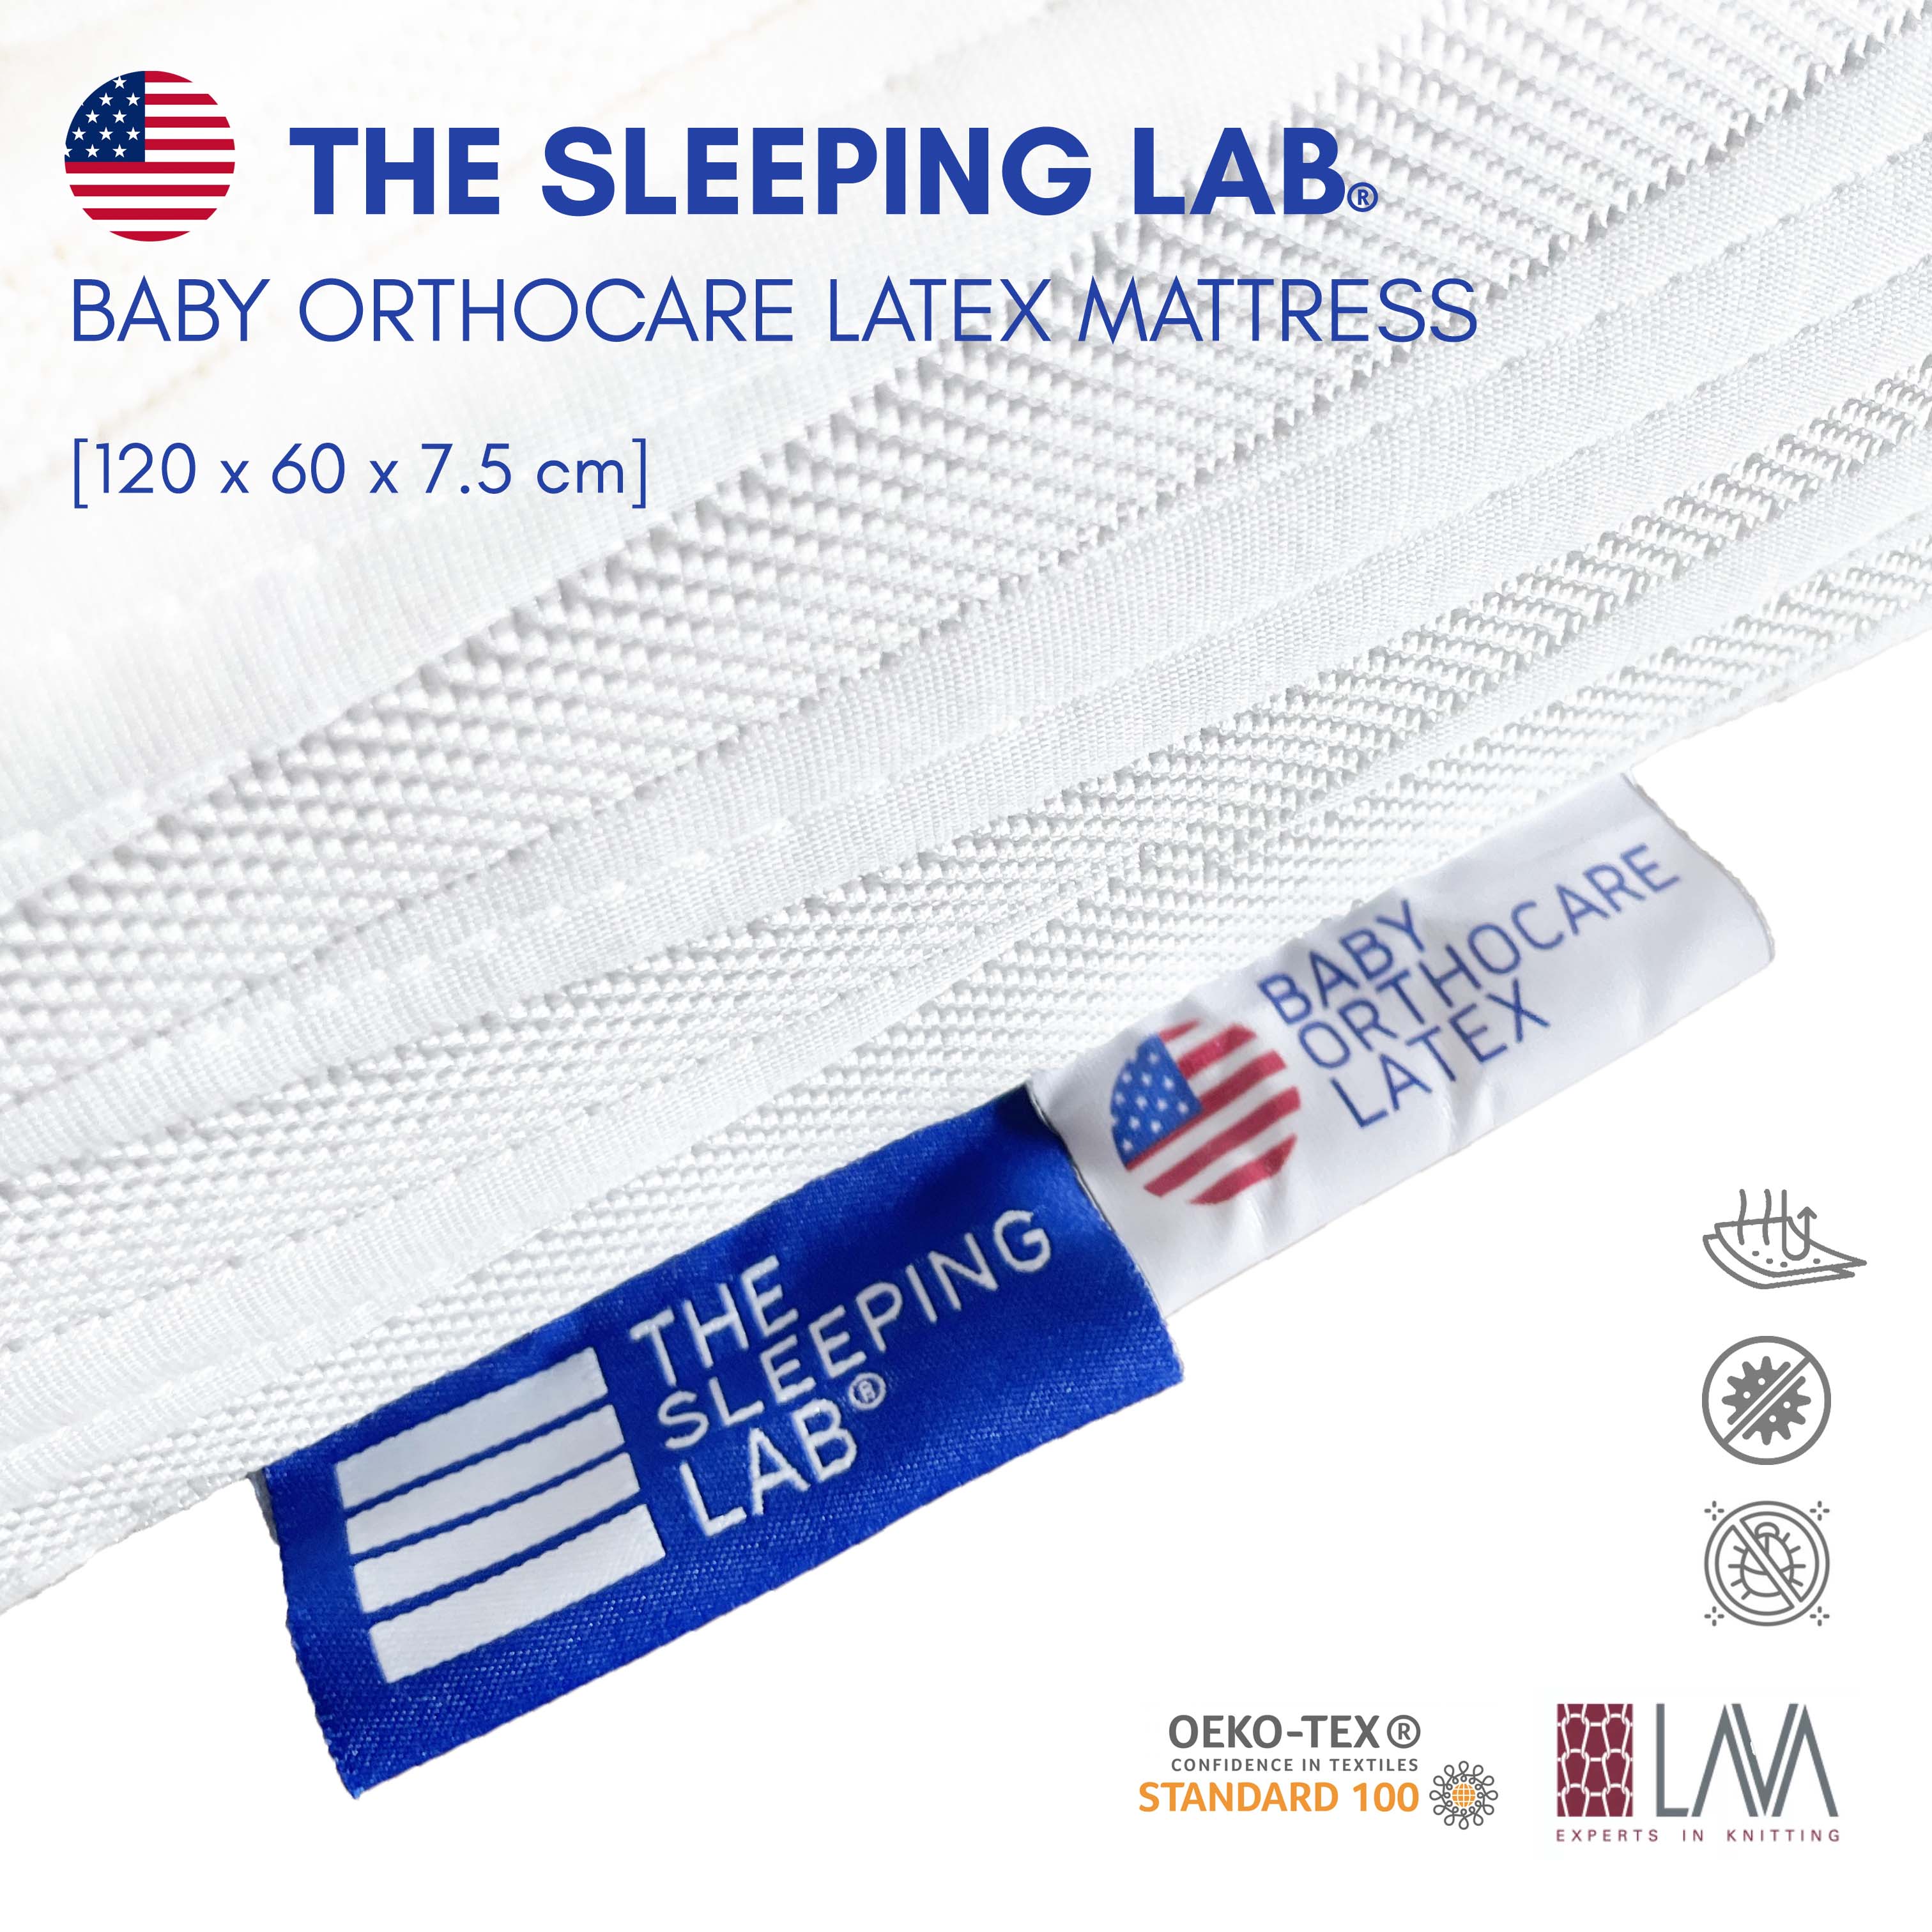 The Sleeping Lab Baby OrthoCare Latex 4" or 10cm Mattress